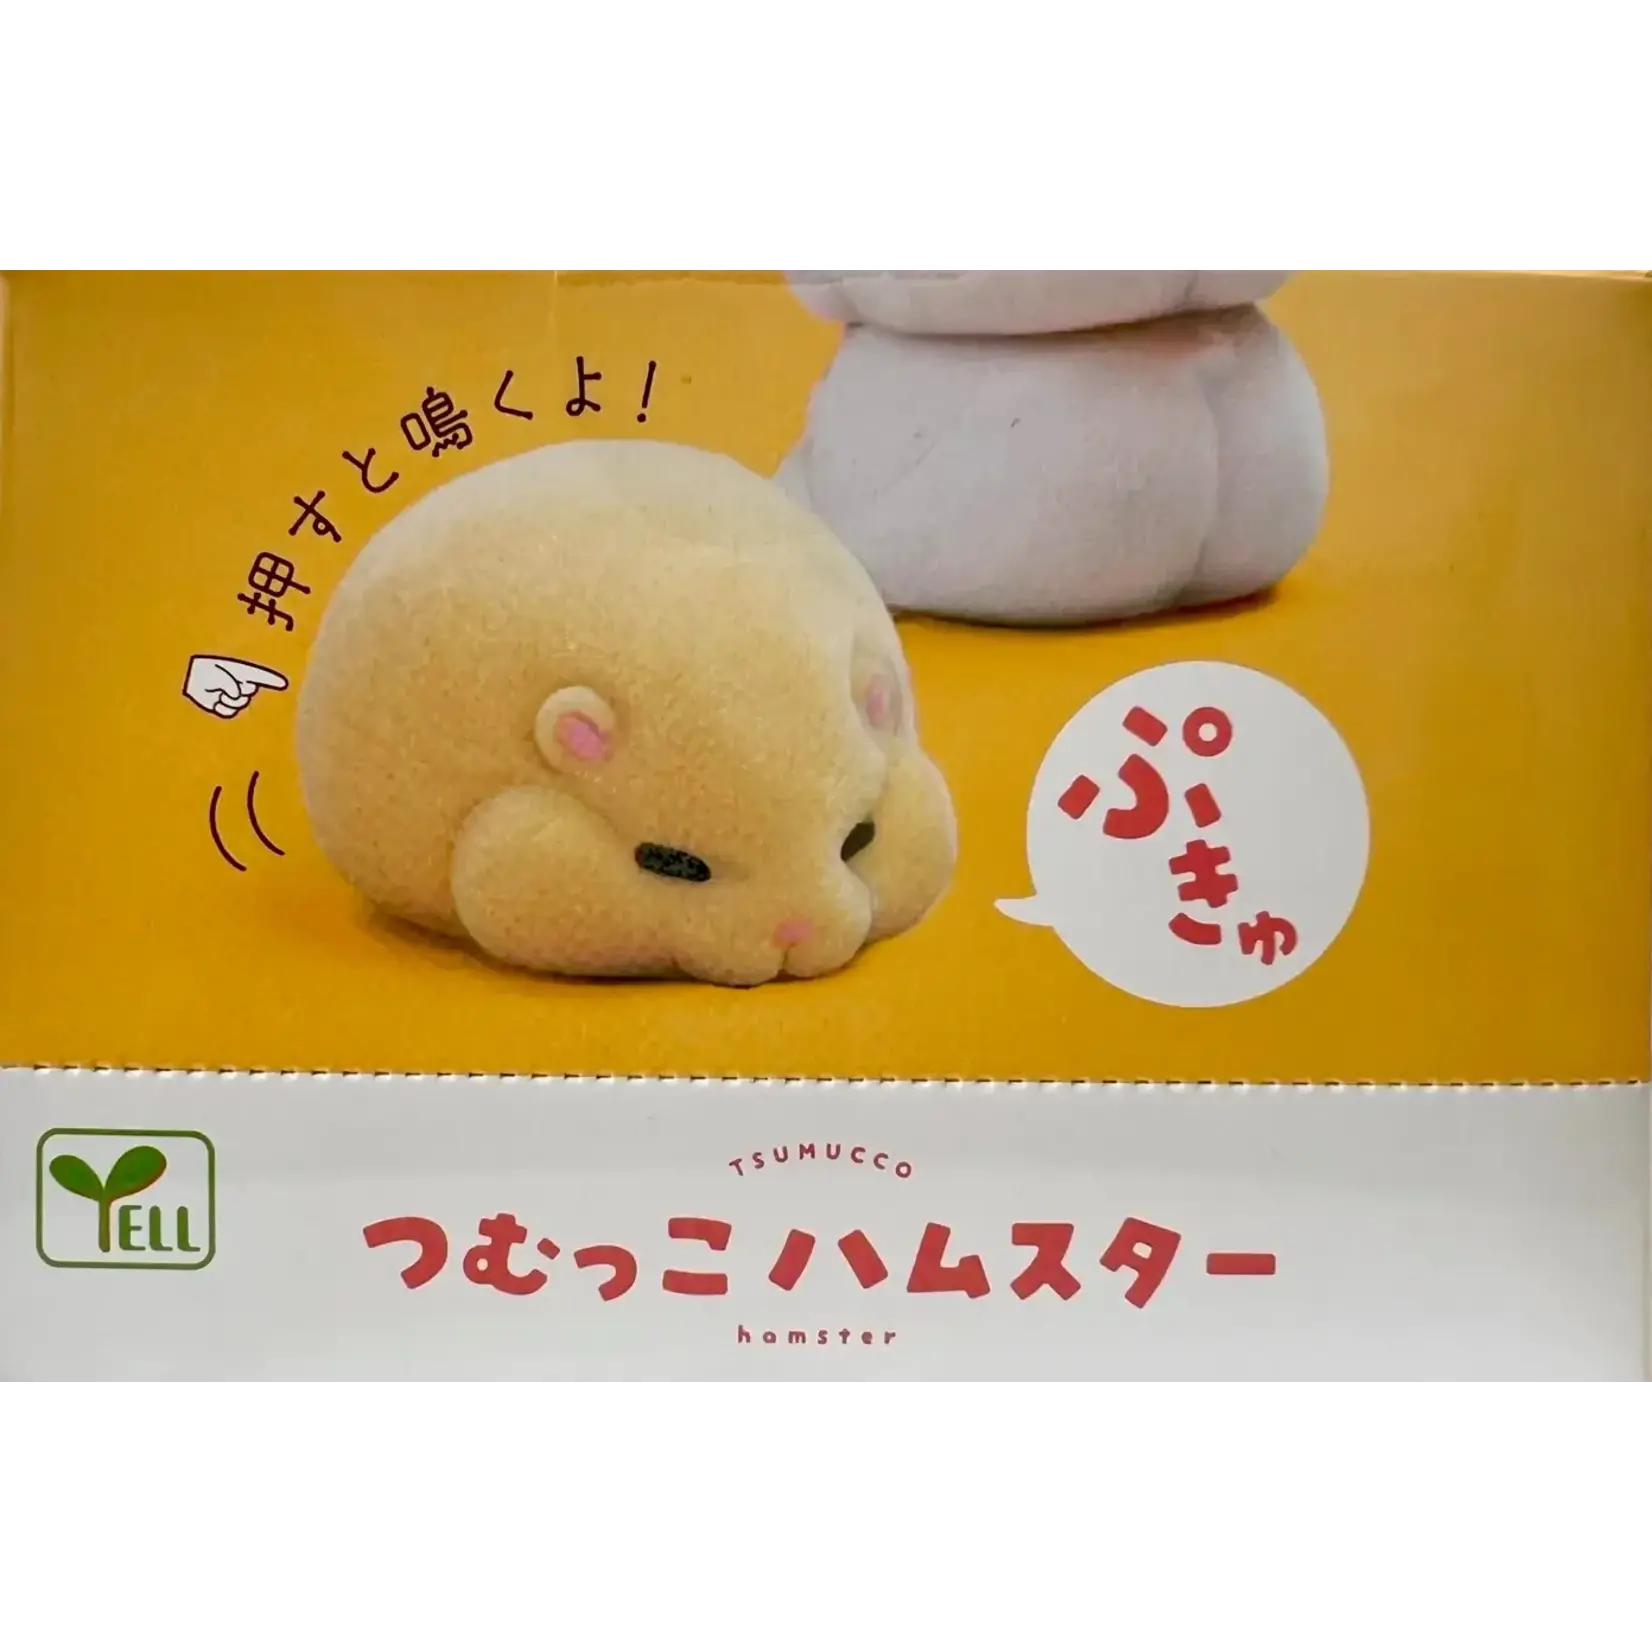 YELL Blind Box - Soft Hamsters 70760